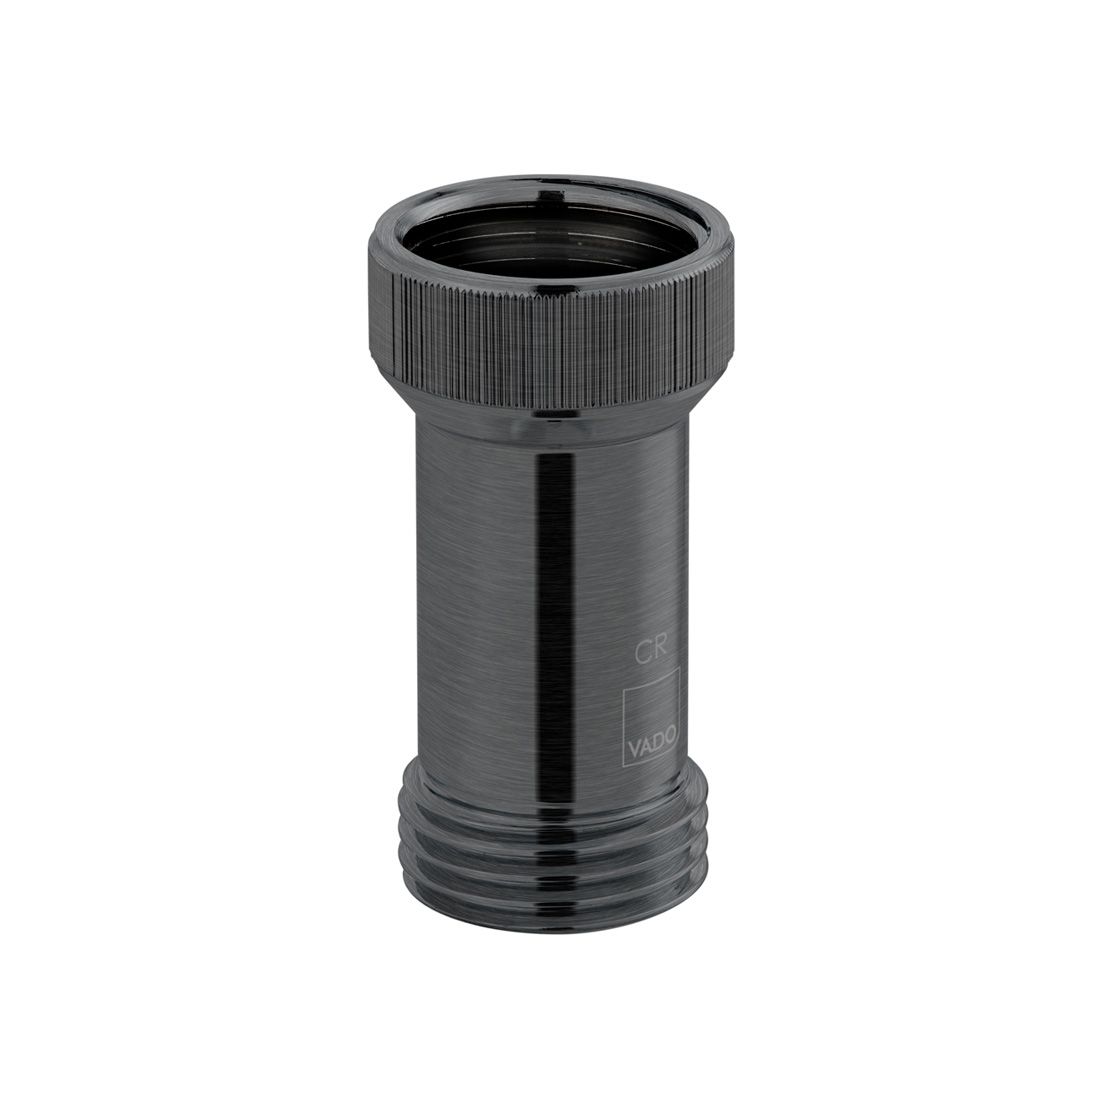 New Product: Double Check Fitting, double check ou double-check 